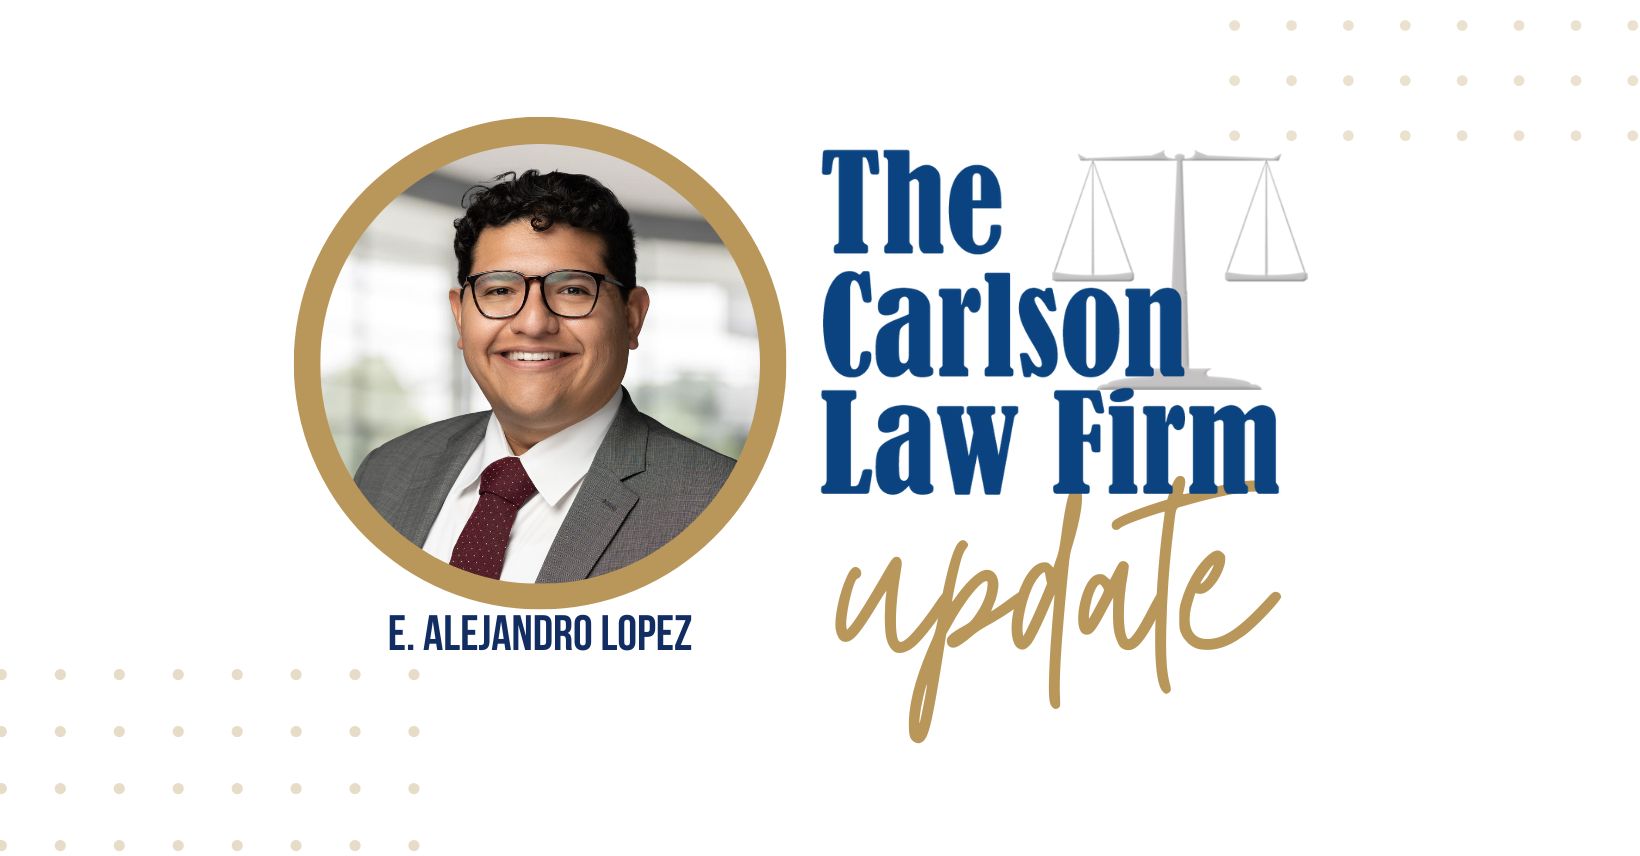 Carlson's Alejandro Lopez recognized as attorney of the year.